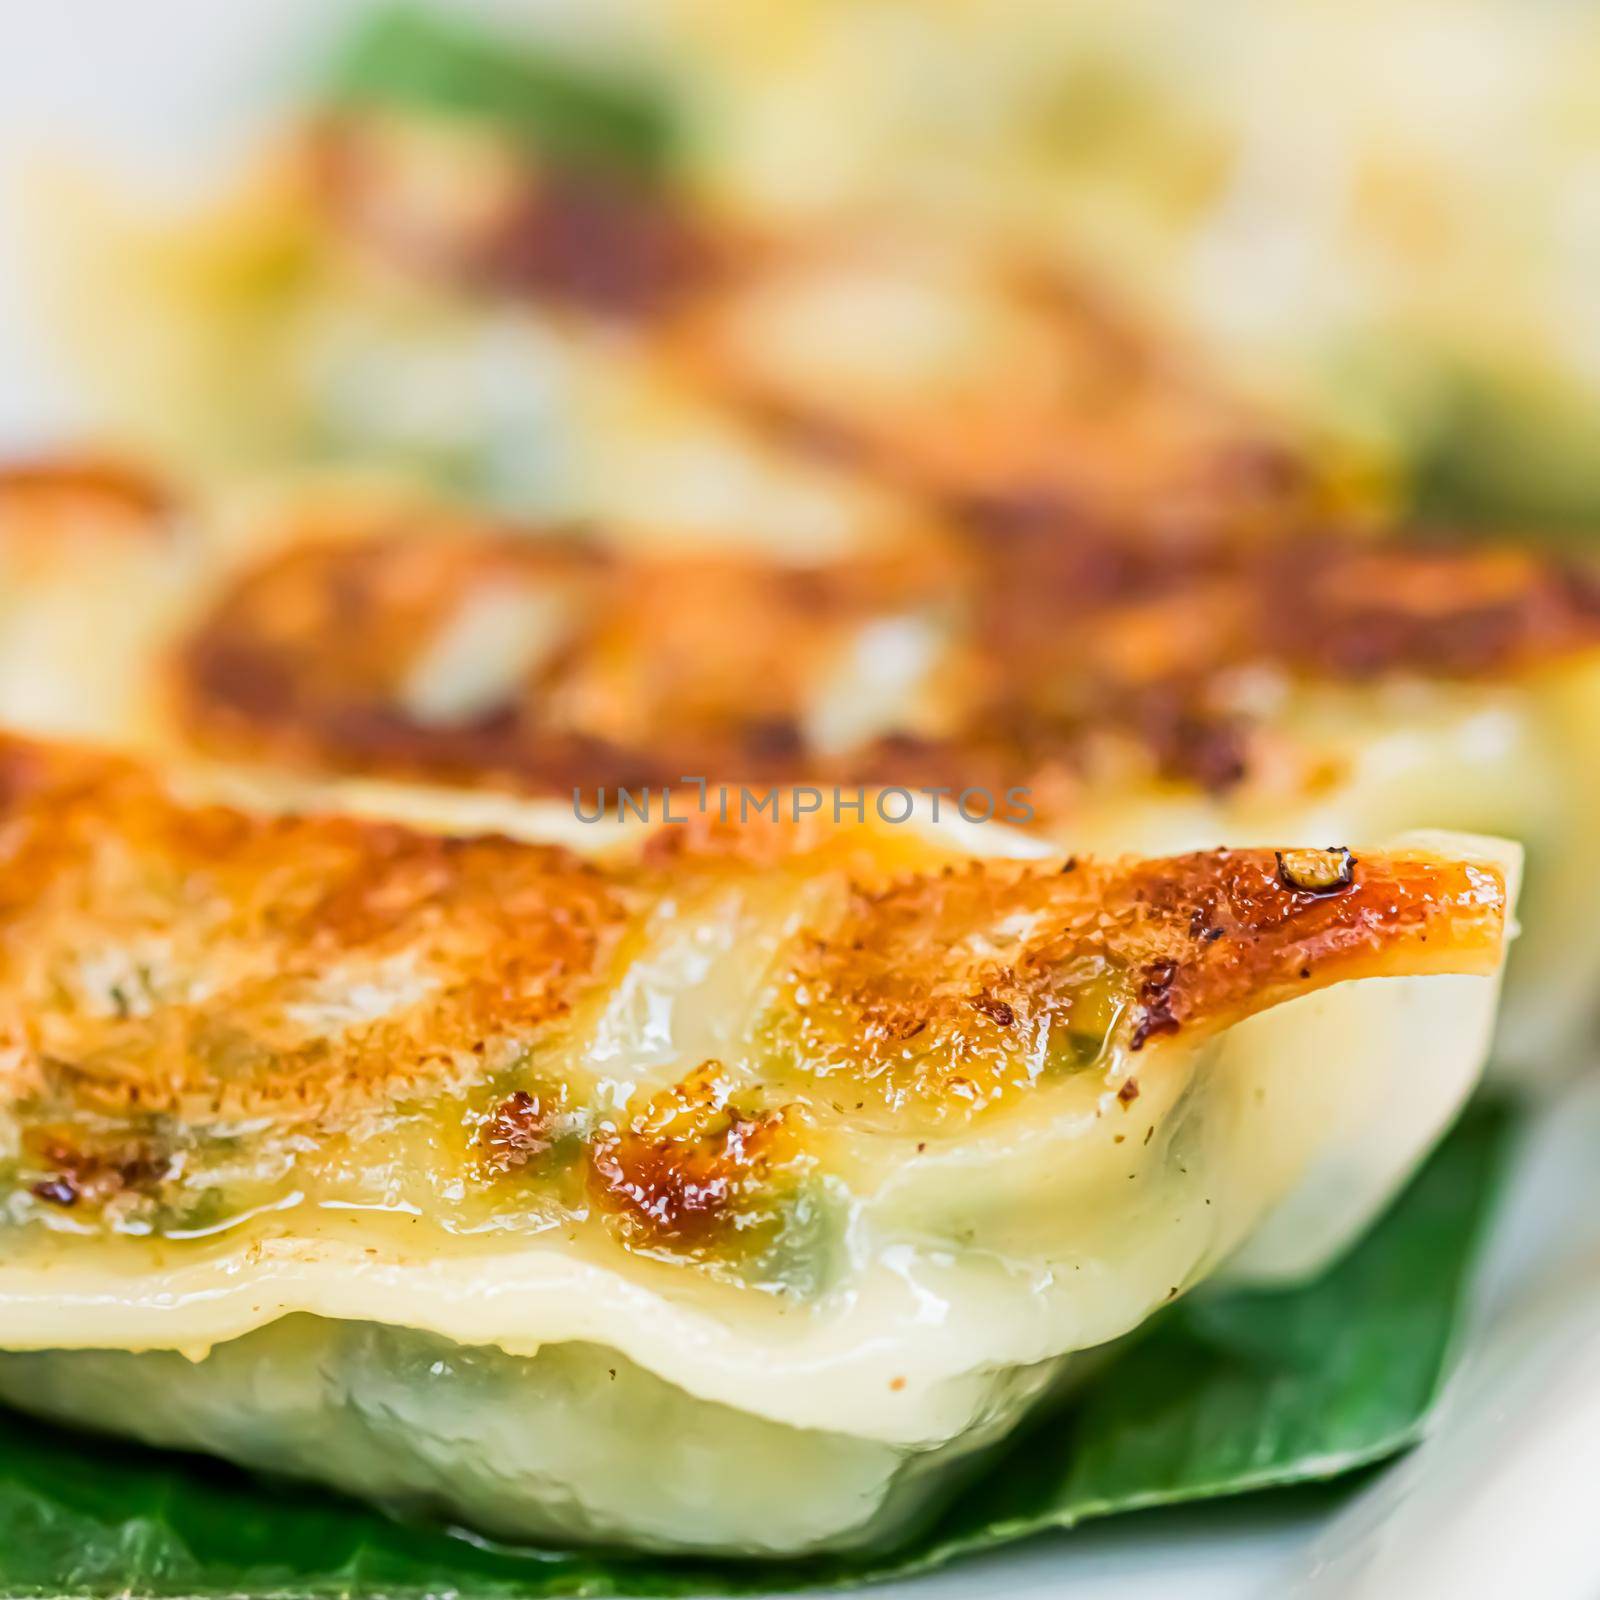 Dumplings with spinach, gyoza served as appetizer on plate in luxury asian restaurant, japanese food and vegetarian menu concept.